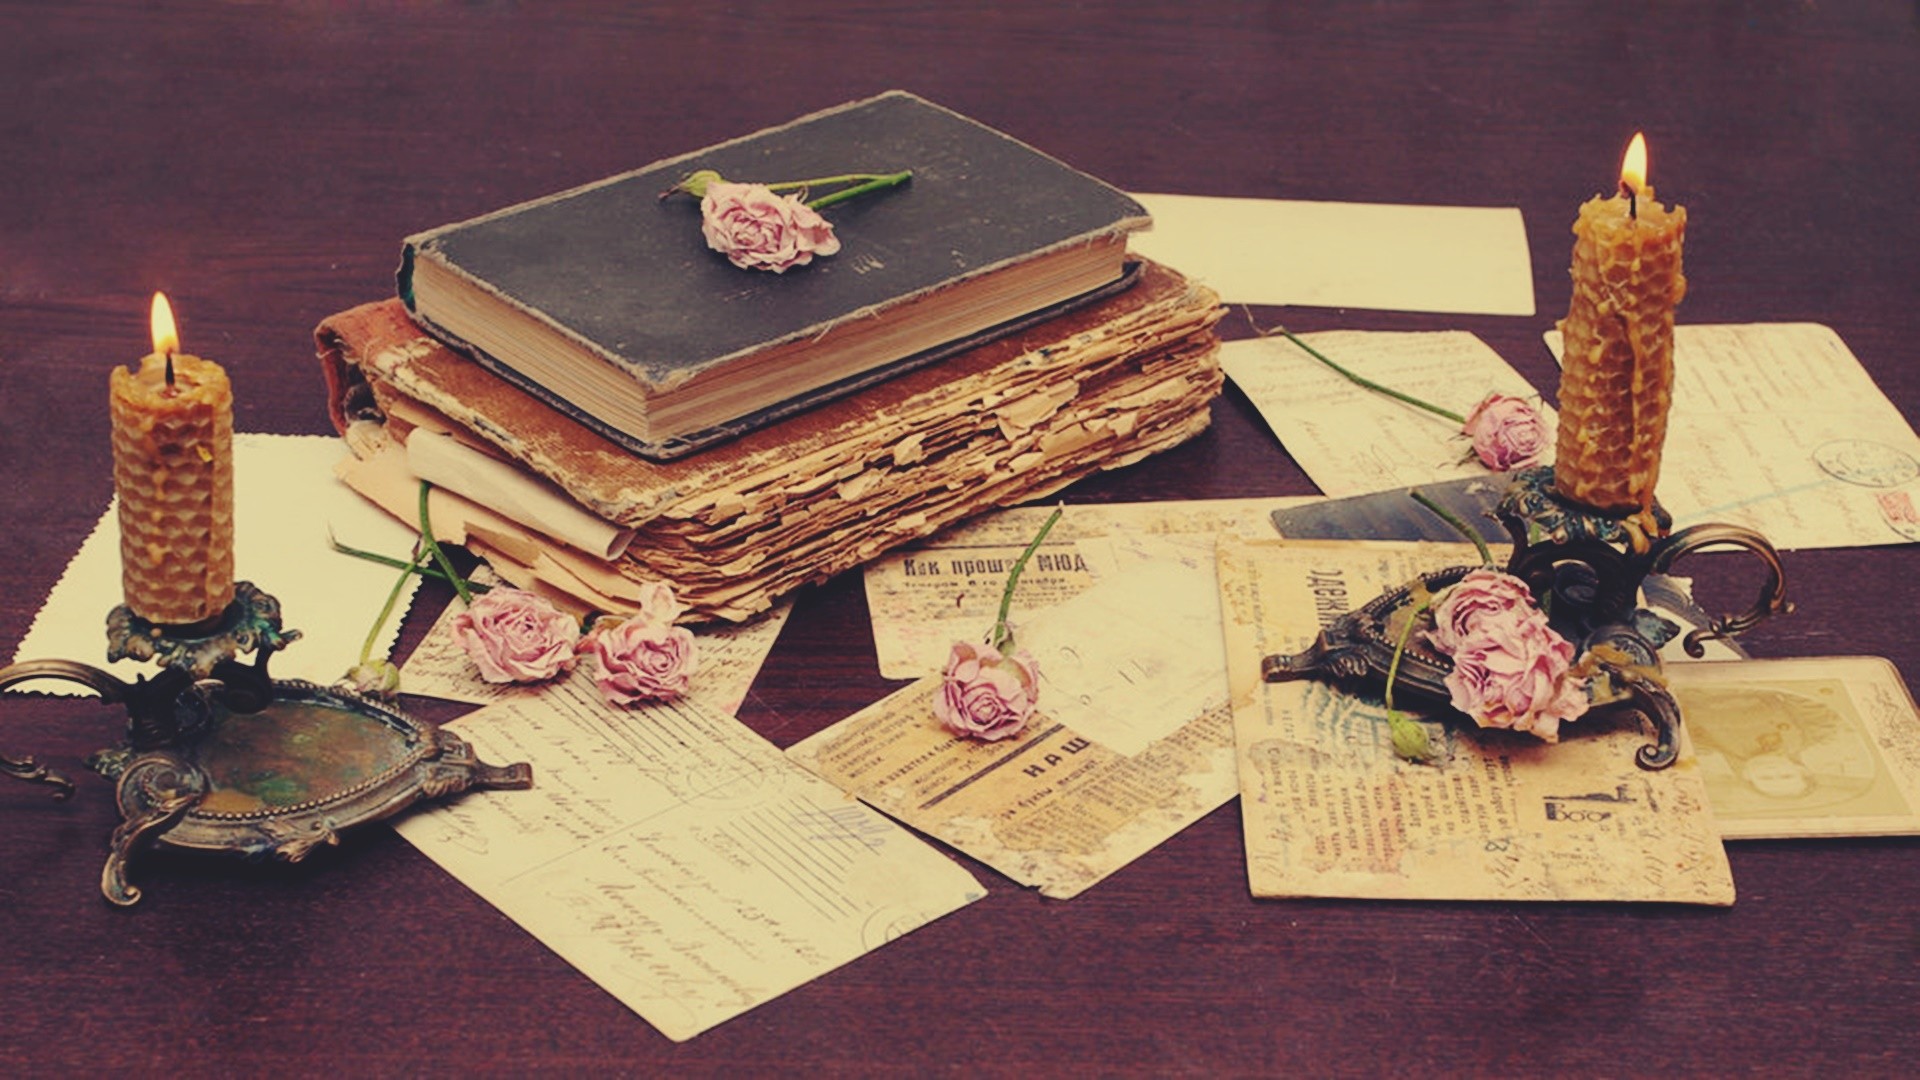 General 1920x1080 books candles rose paper table vintage old still life plants flowers pink flowers